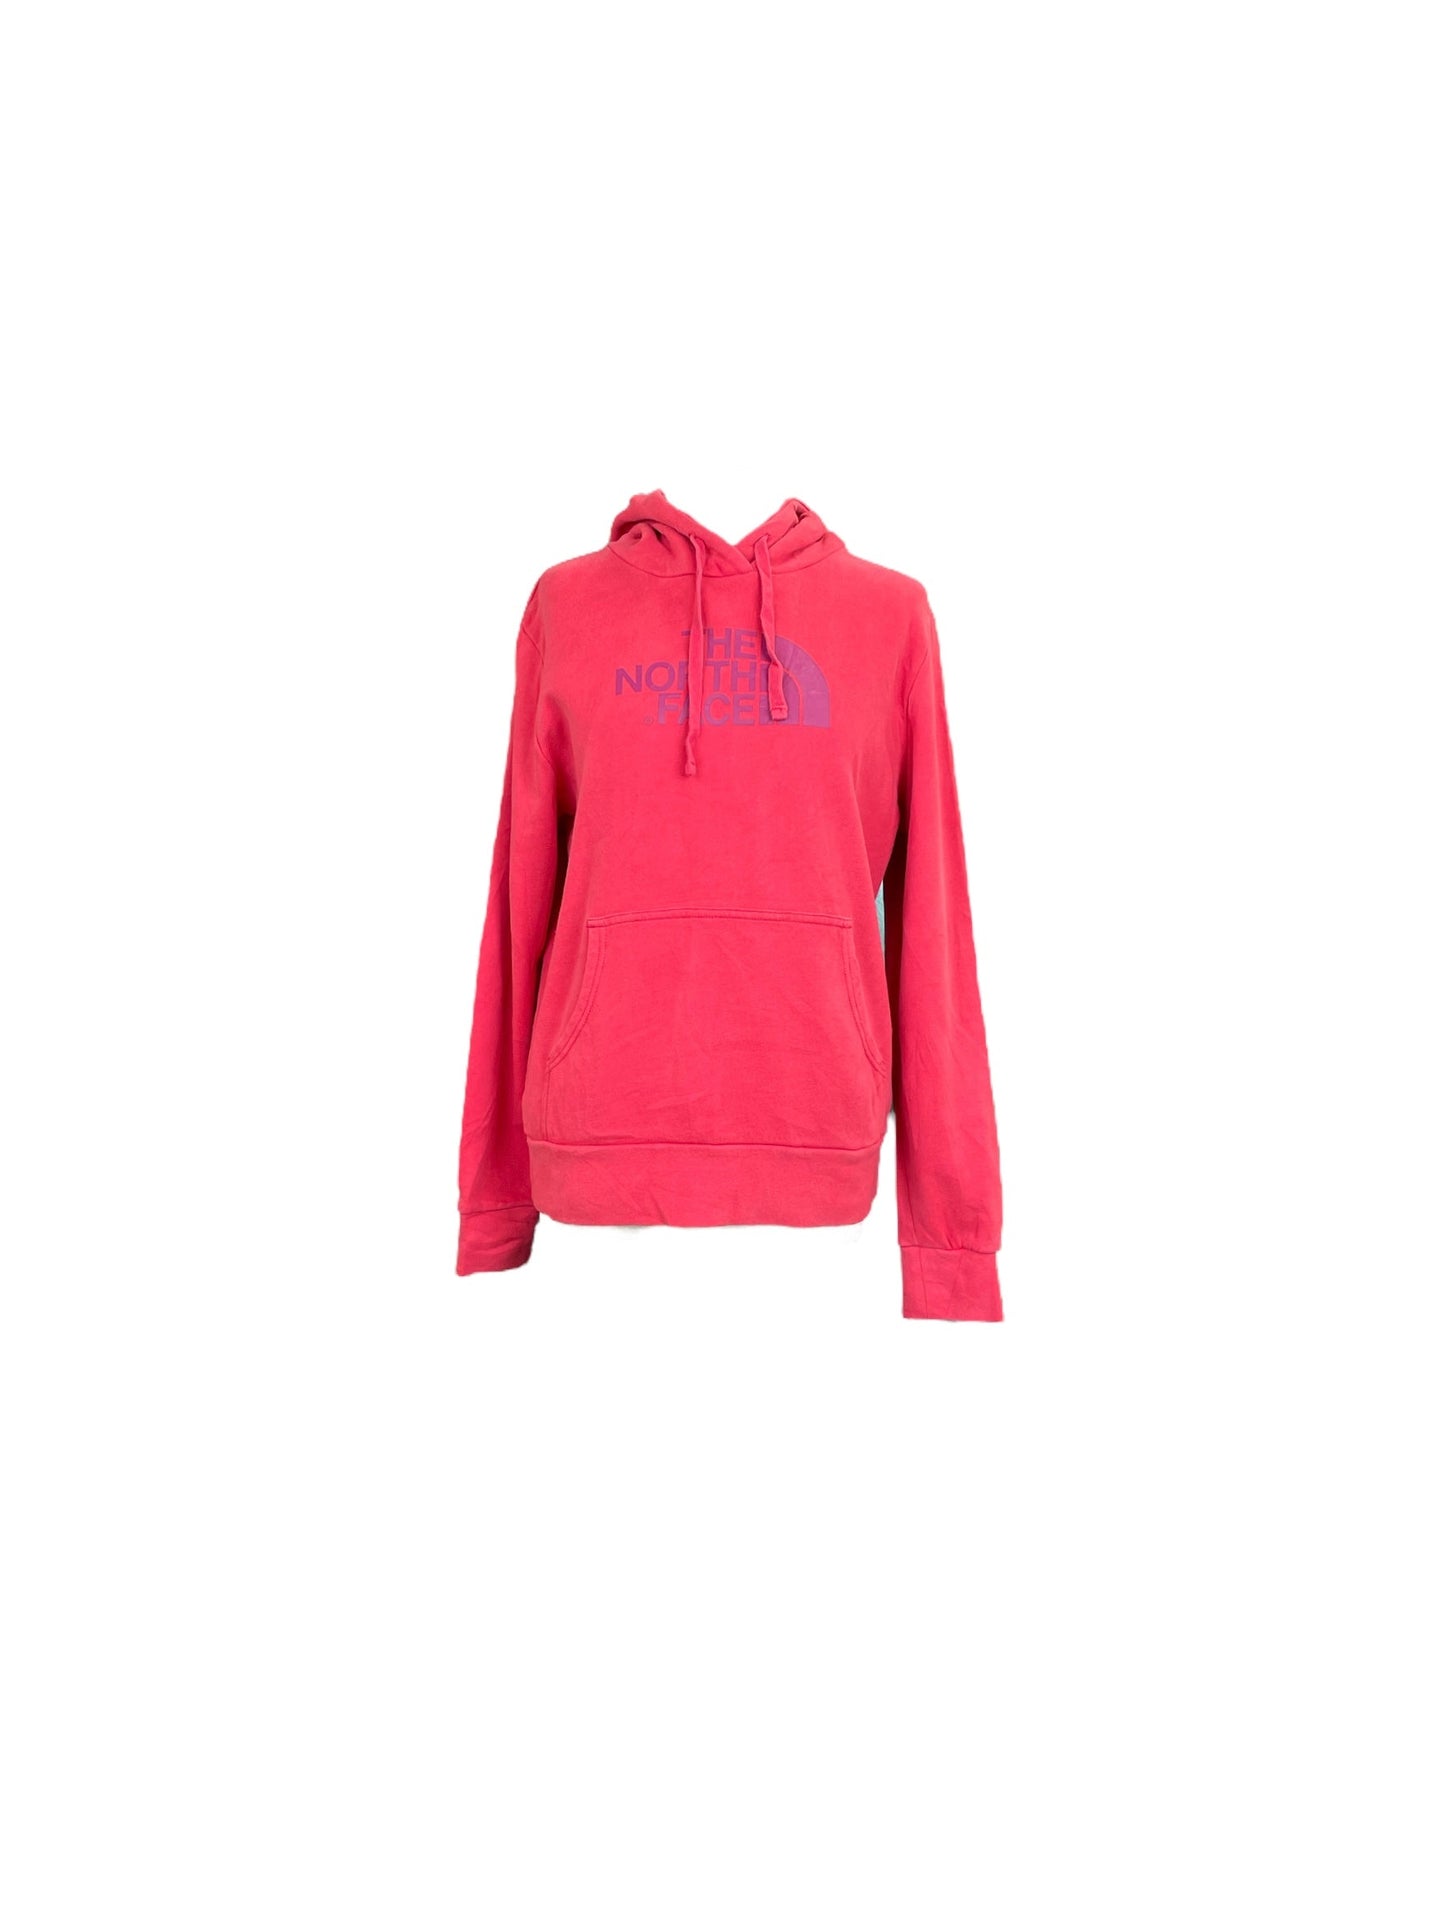 Womens North Face Hoodie - M